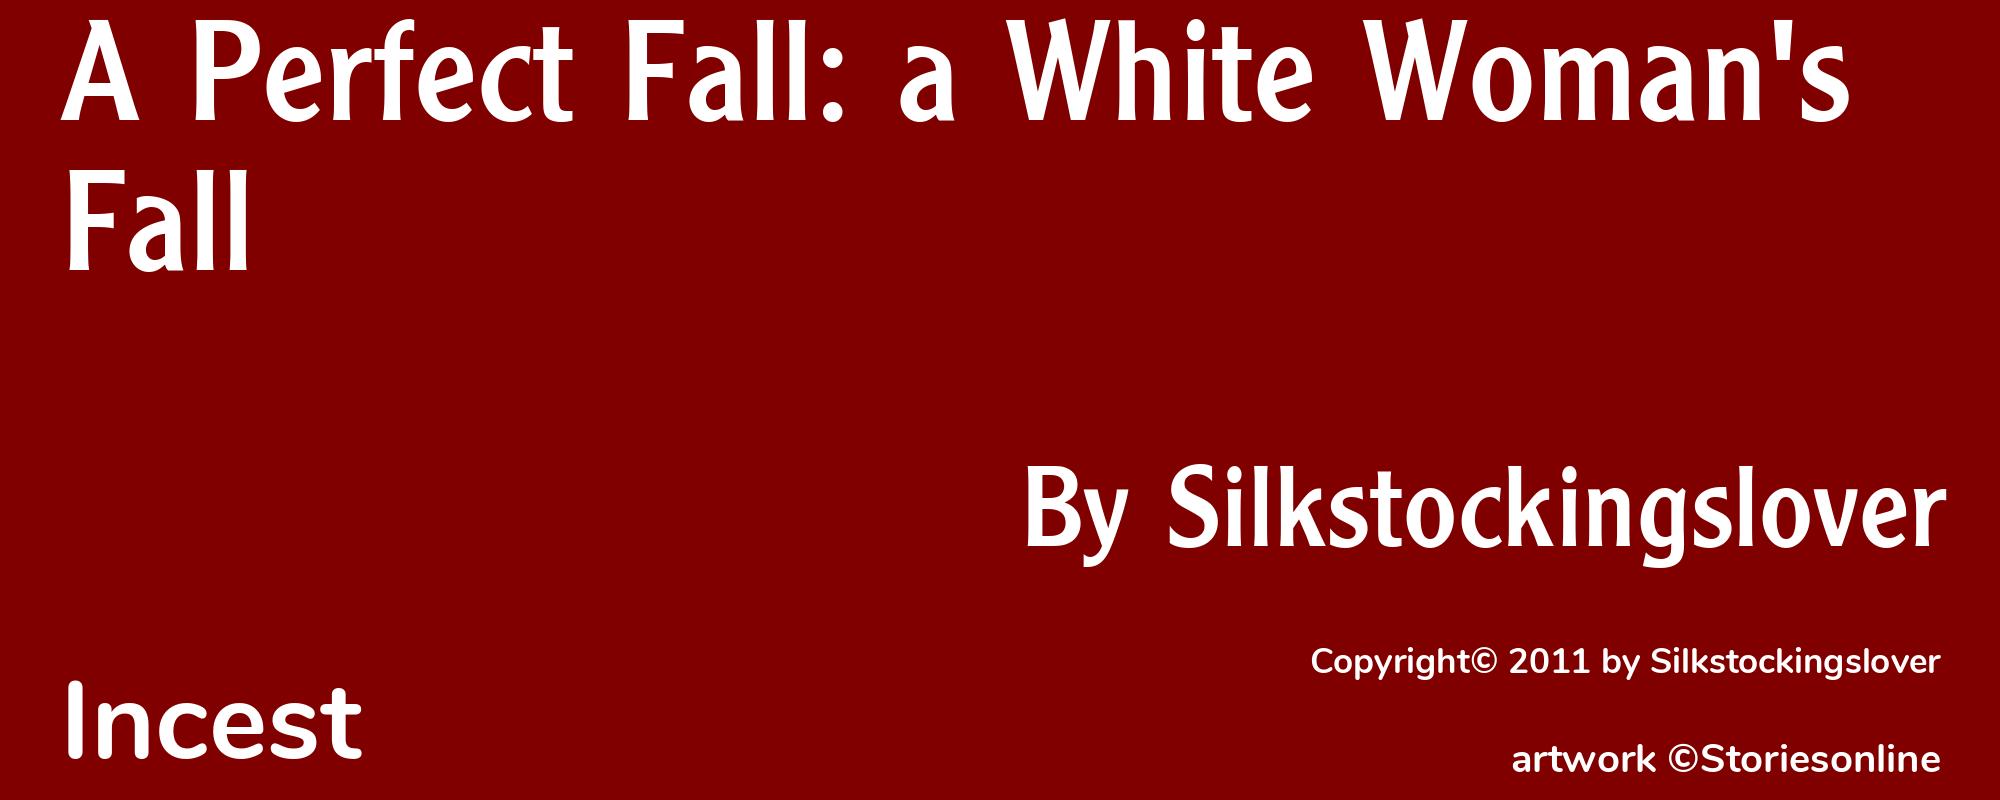 A Perfect Fall: a White Woman's Fall - Cover